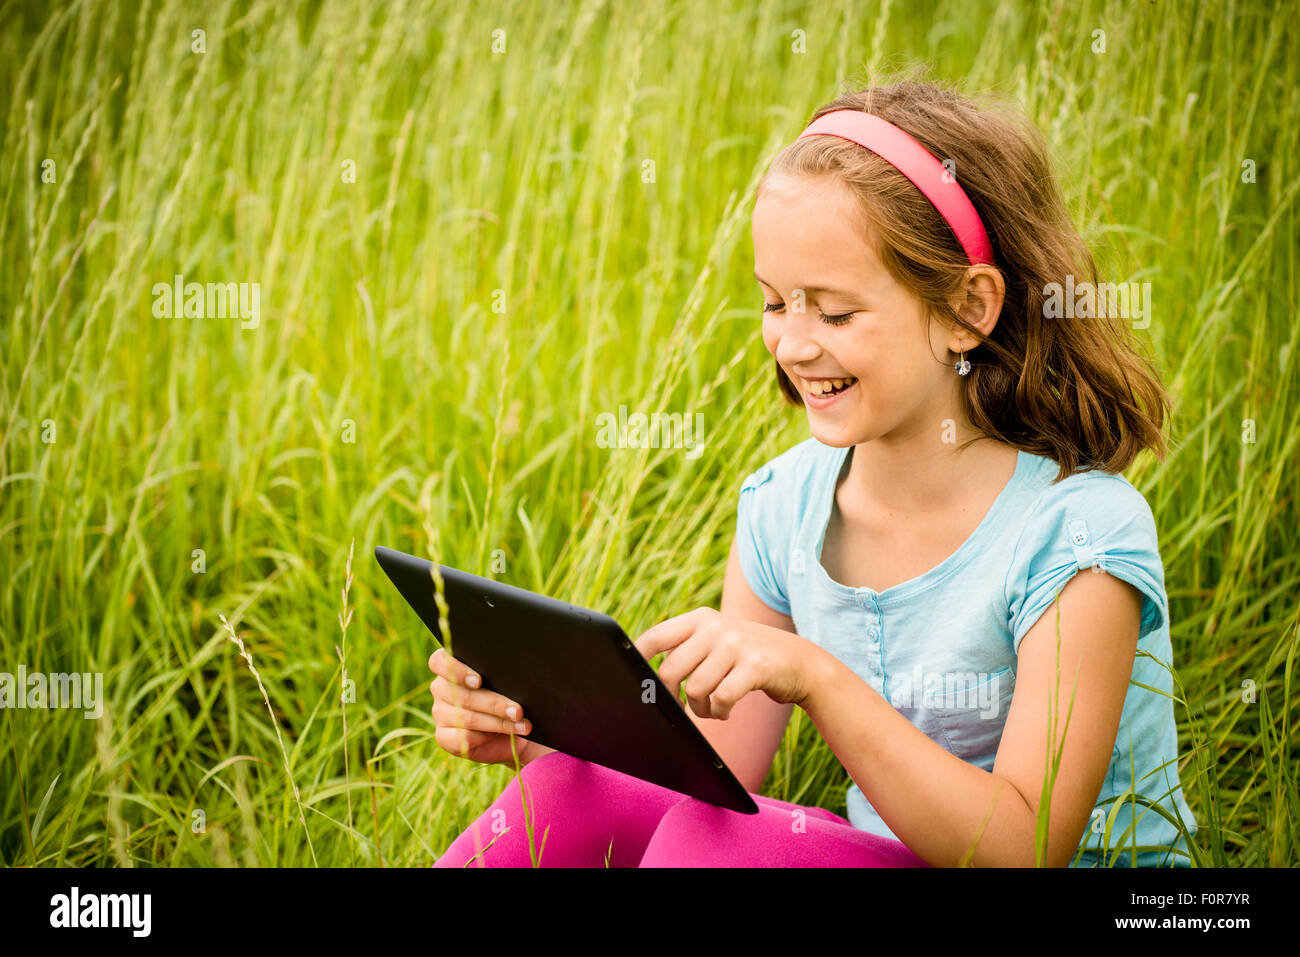 Smiling child working with tablet outdoor in nature Stock Photo